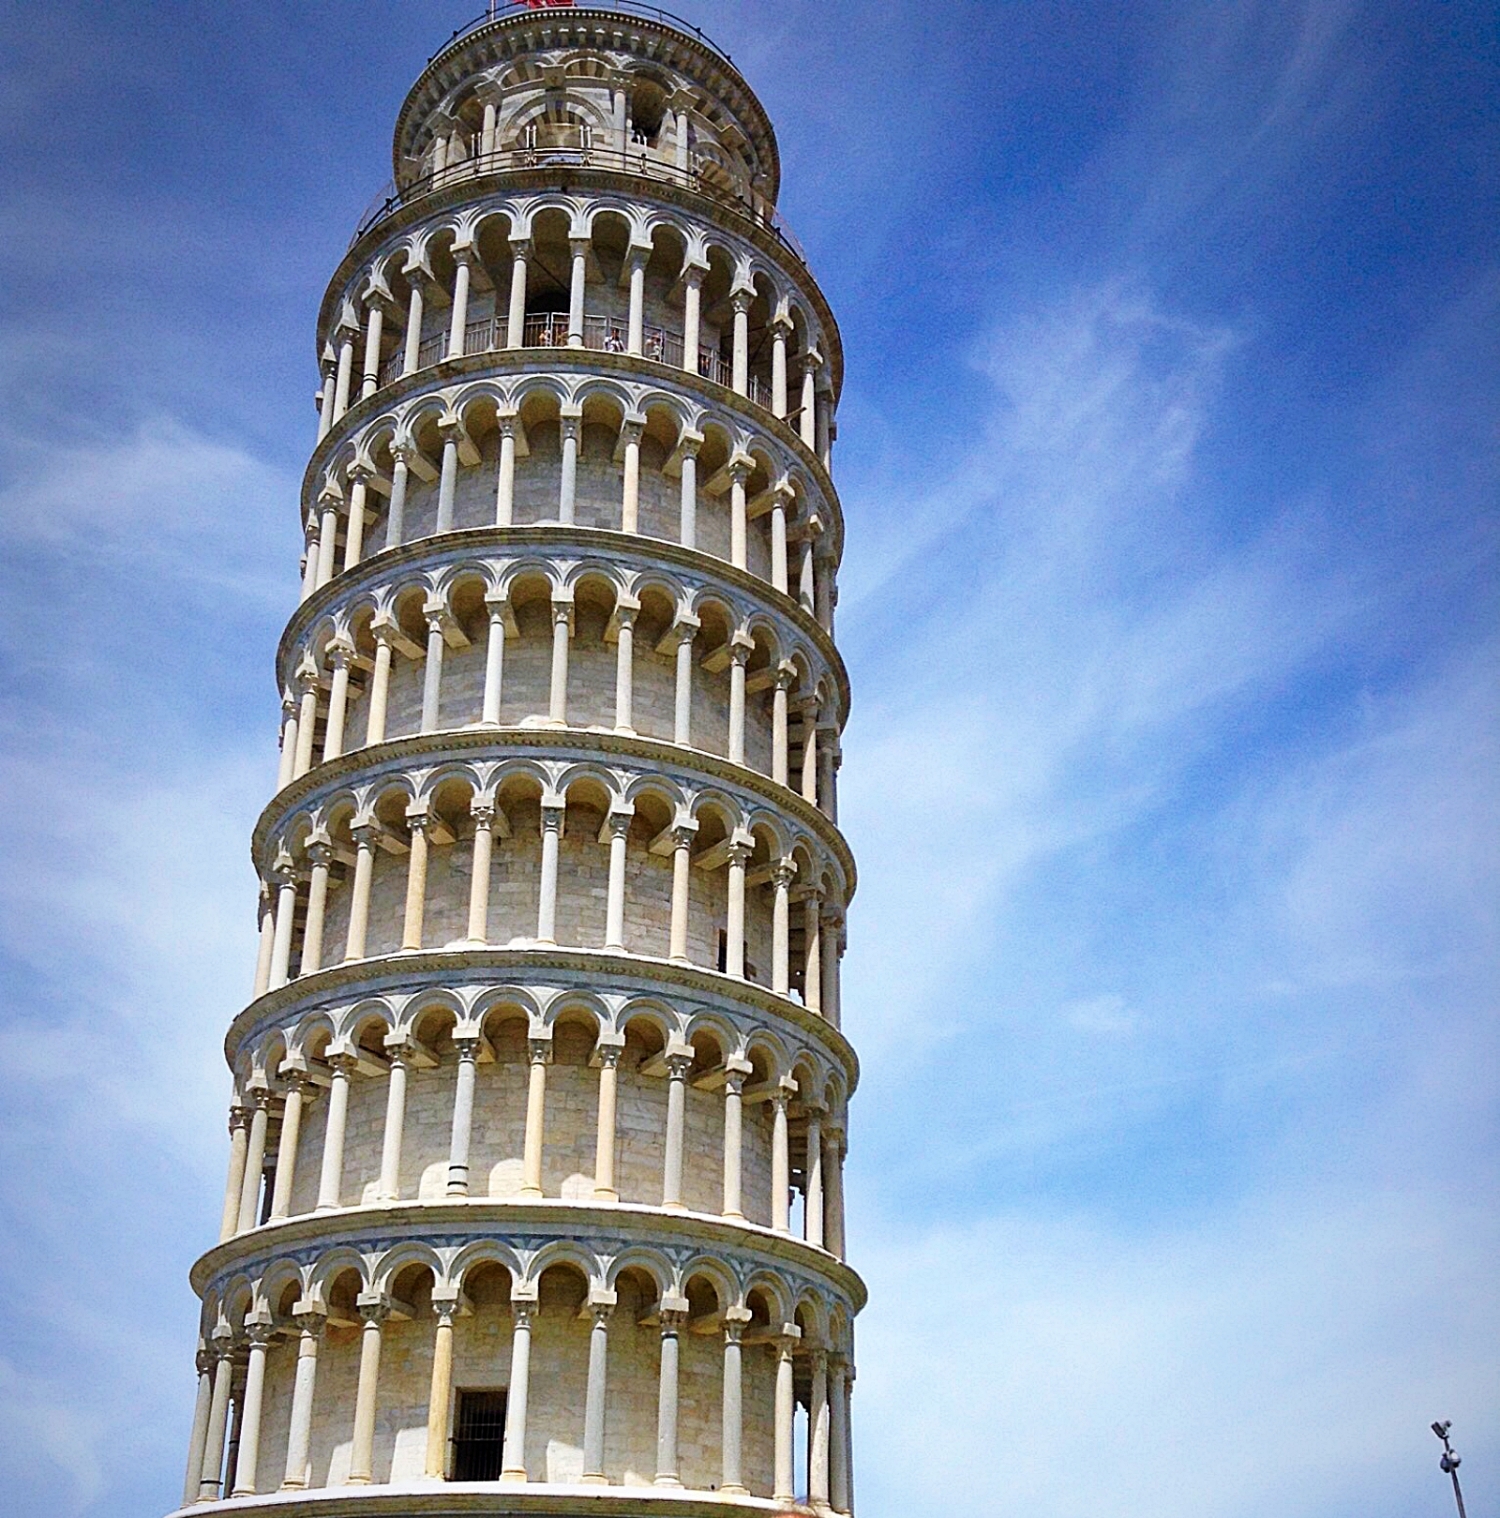 How is the Leaning Tower of Pisa Straightening?